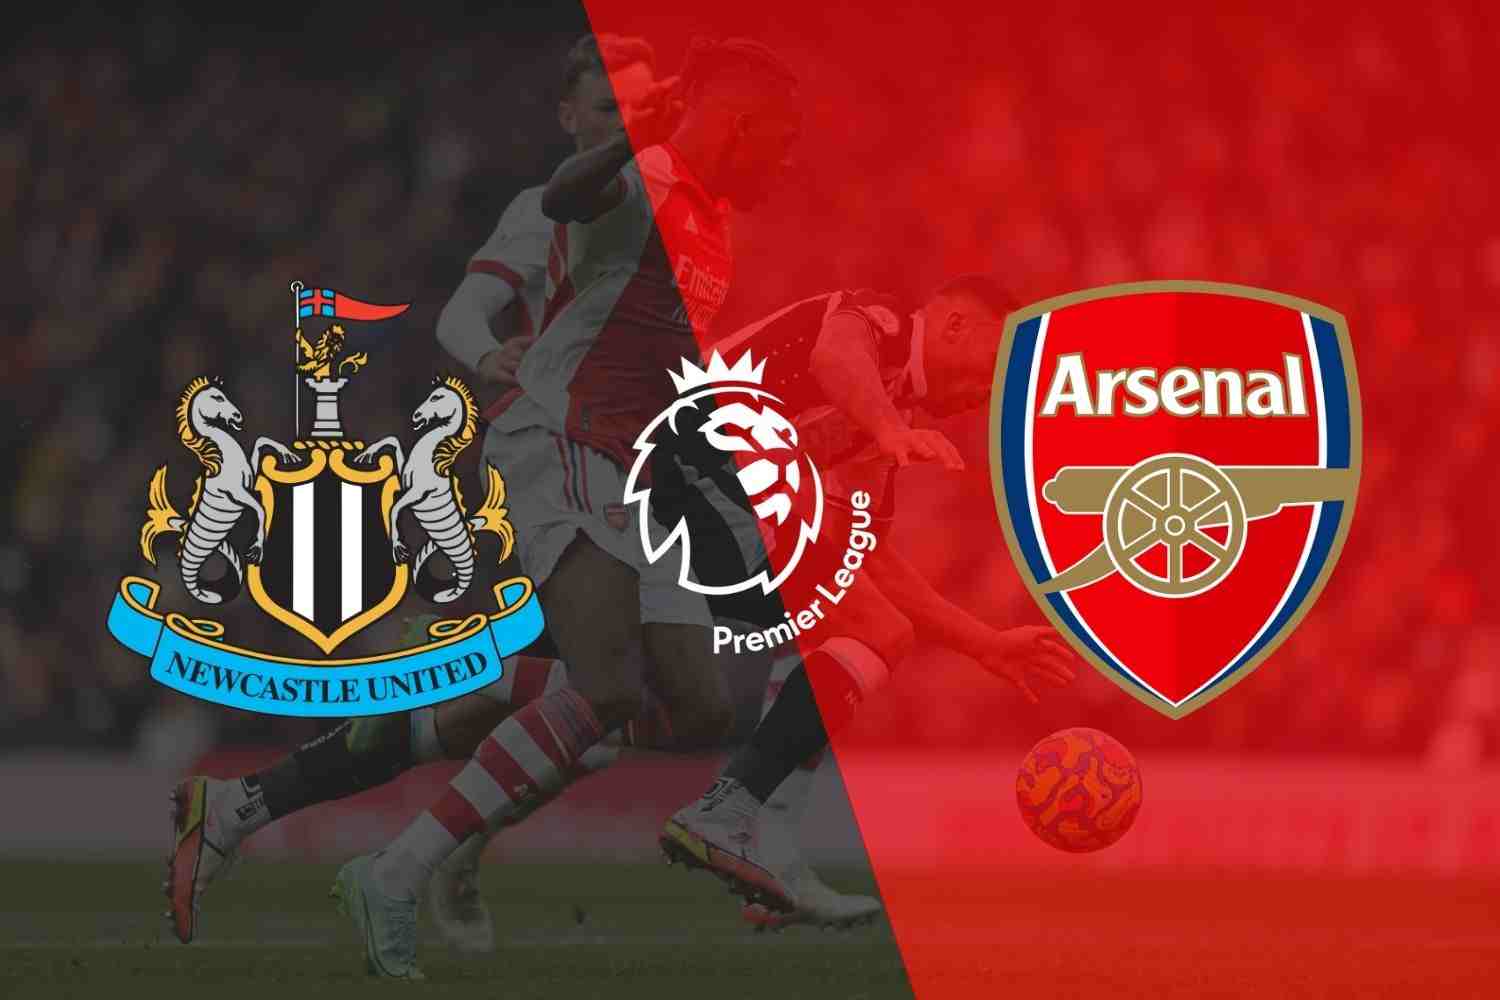 Newcastle vs Arsenal match preview and betting prediction